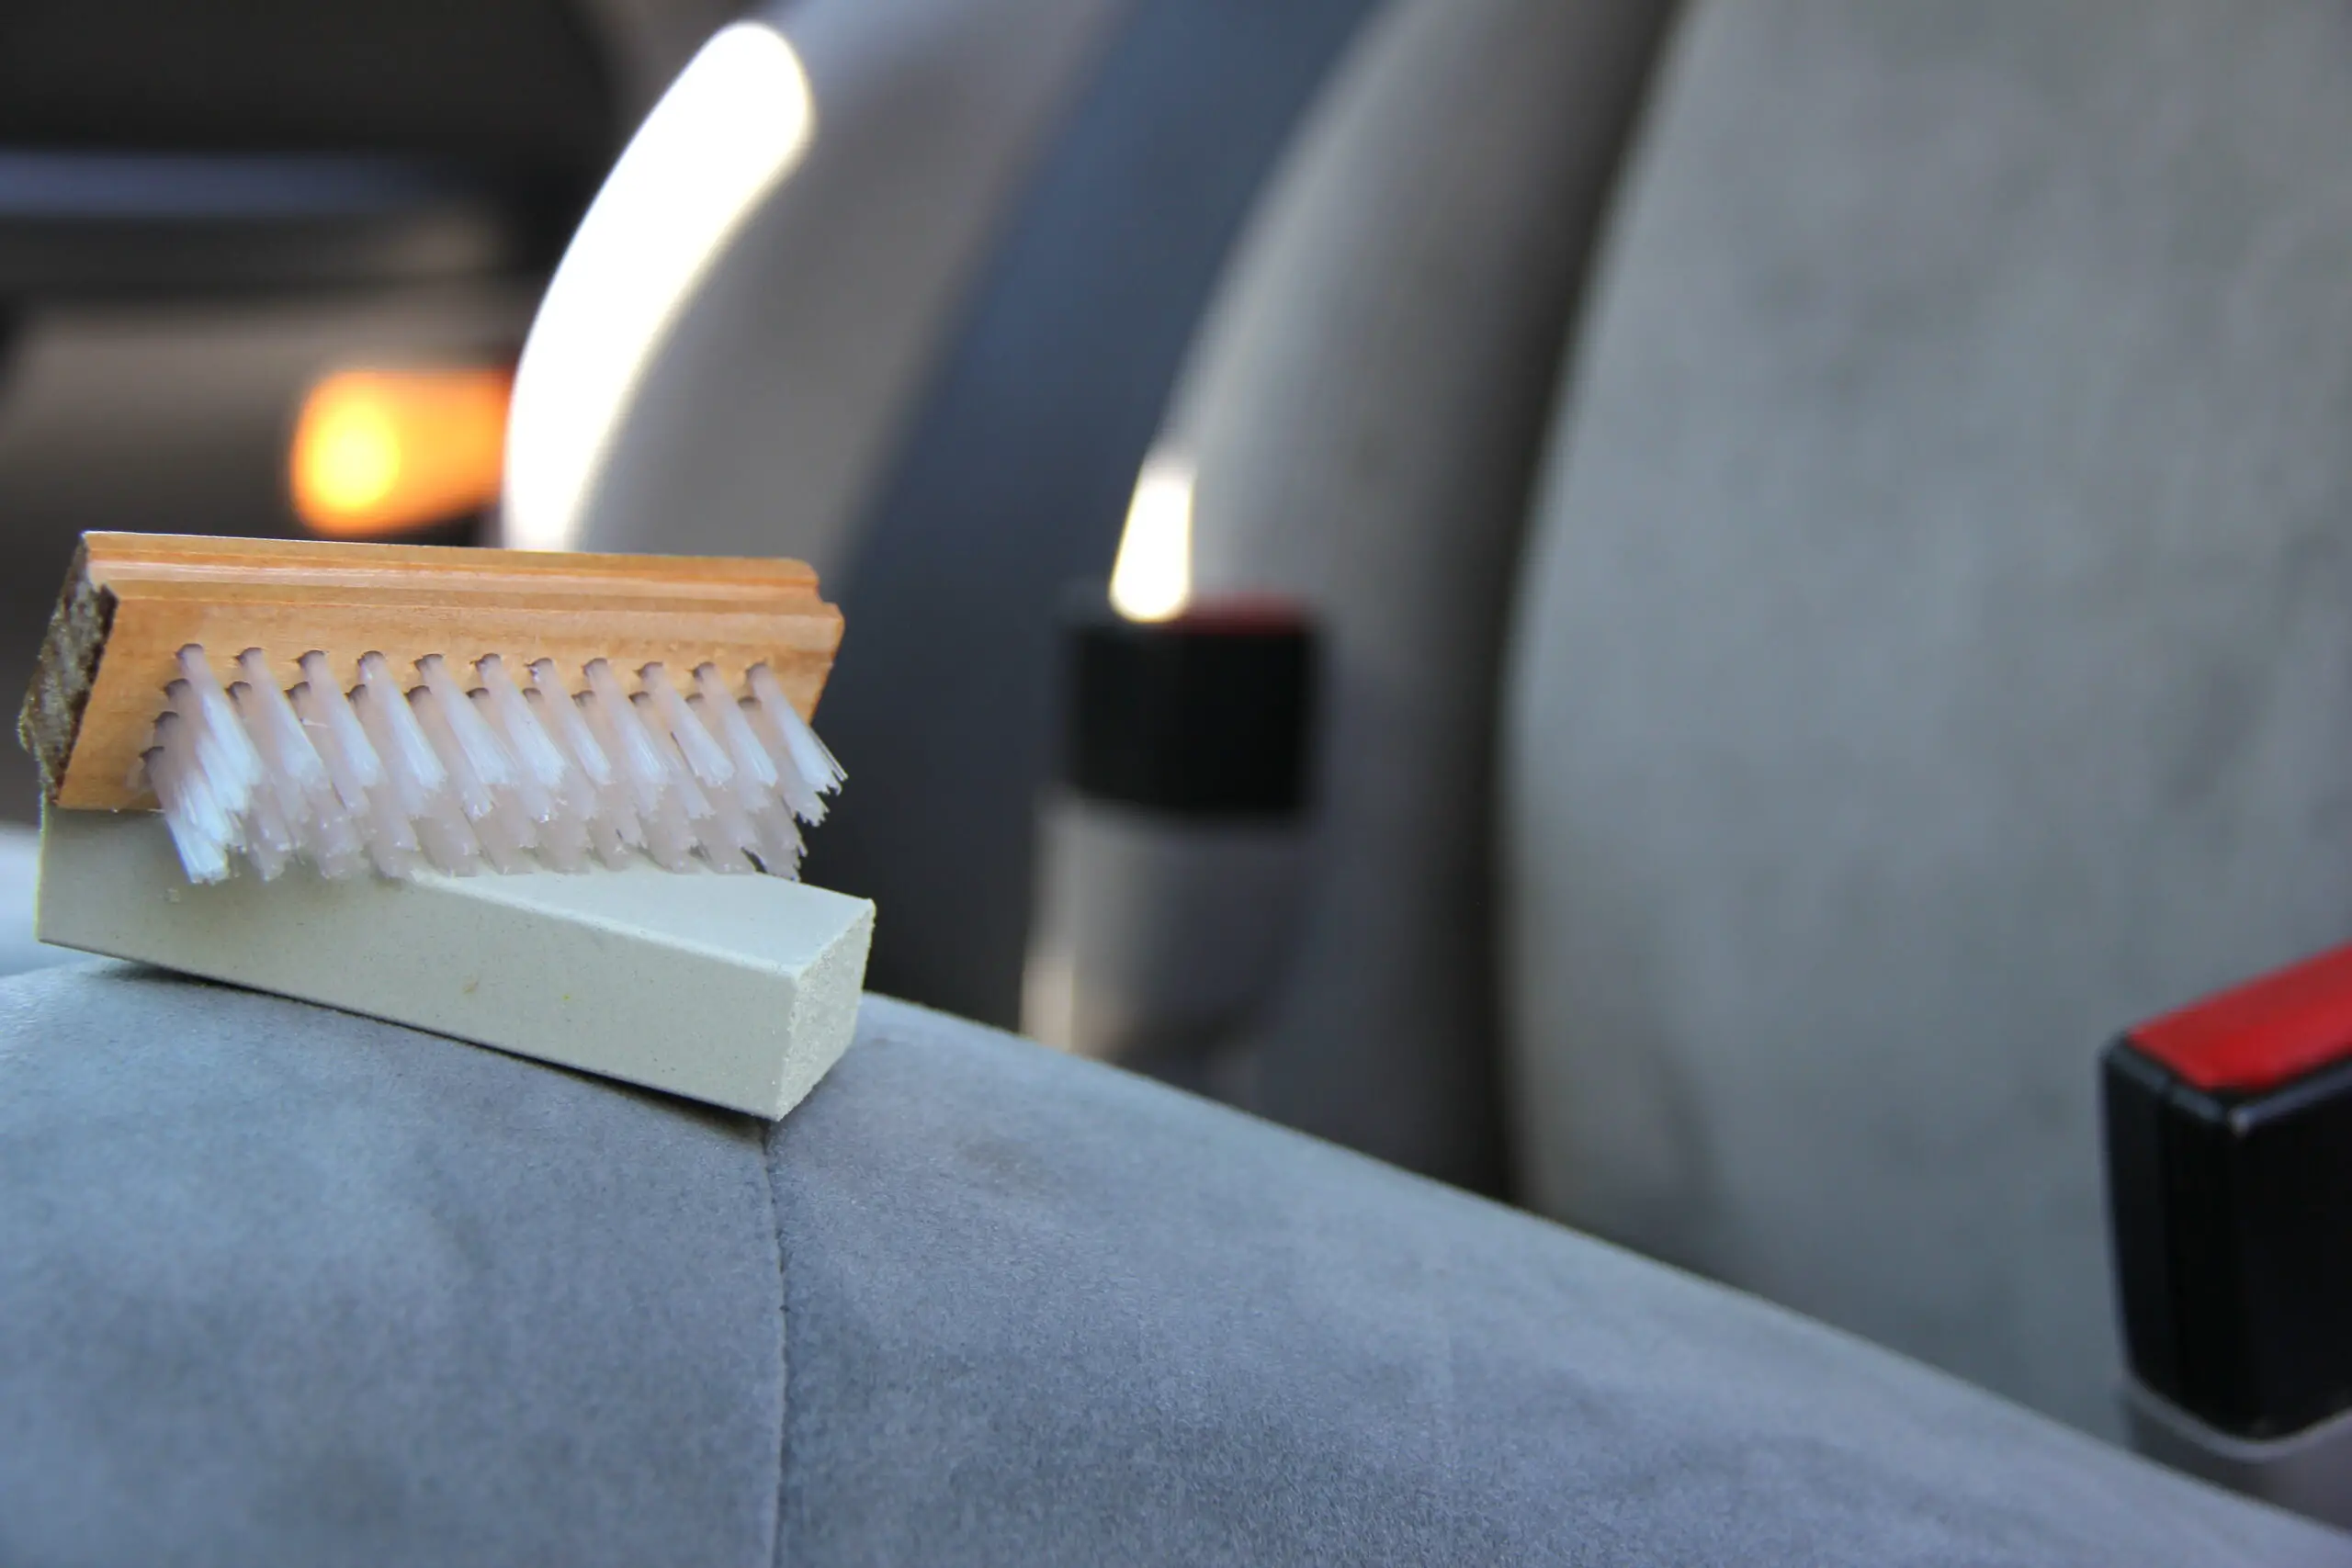 How to Clean Suede Car Seats